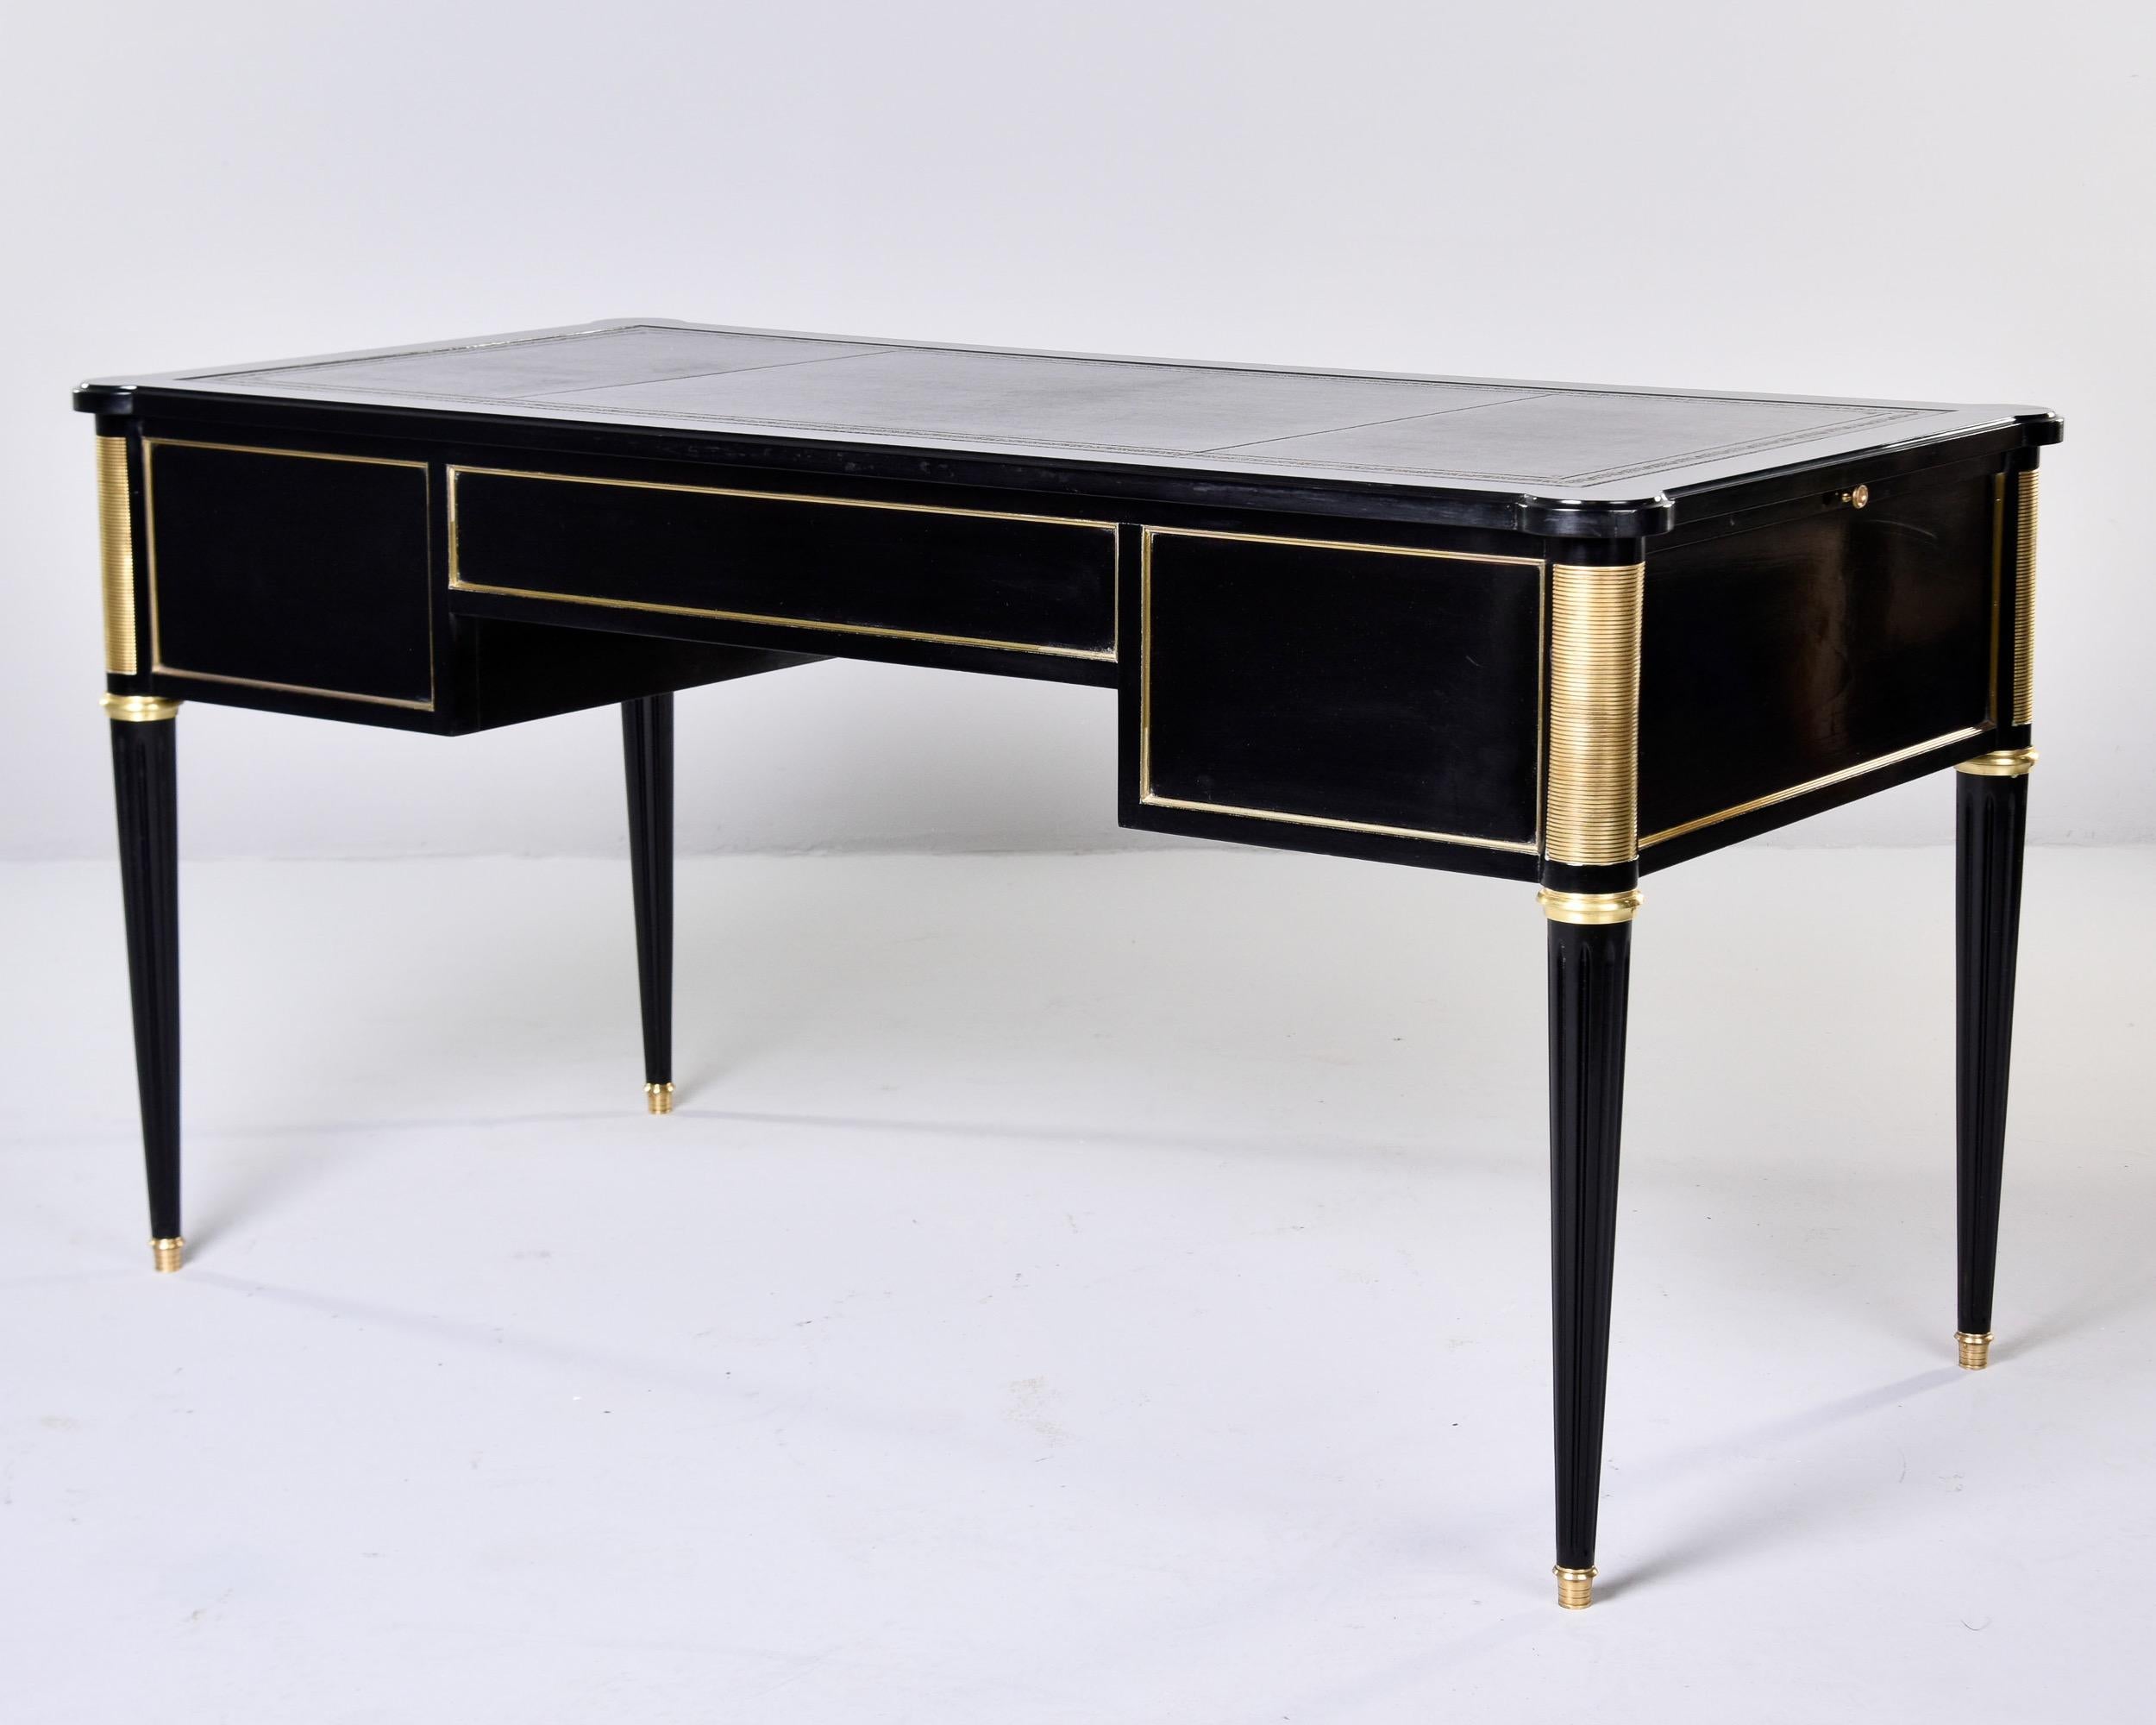 19th C Louis XVI Style Ebonised Desk with Brass Mounts and New Leather Top  For Sale 6